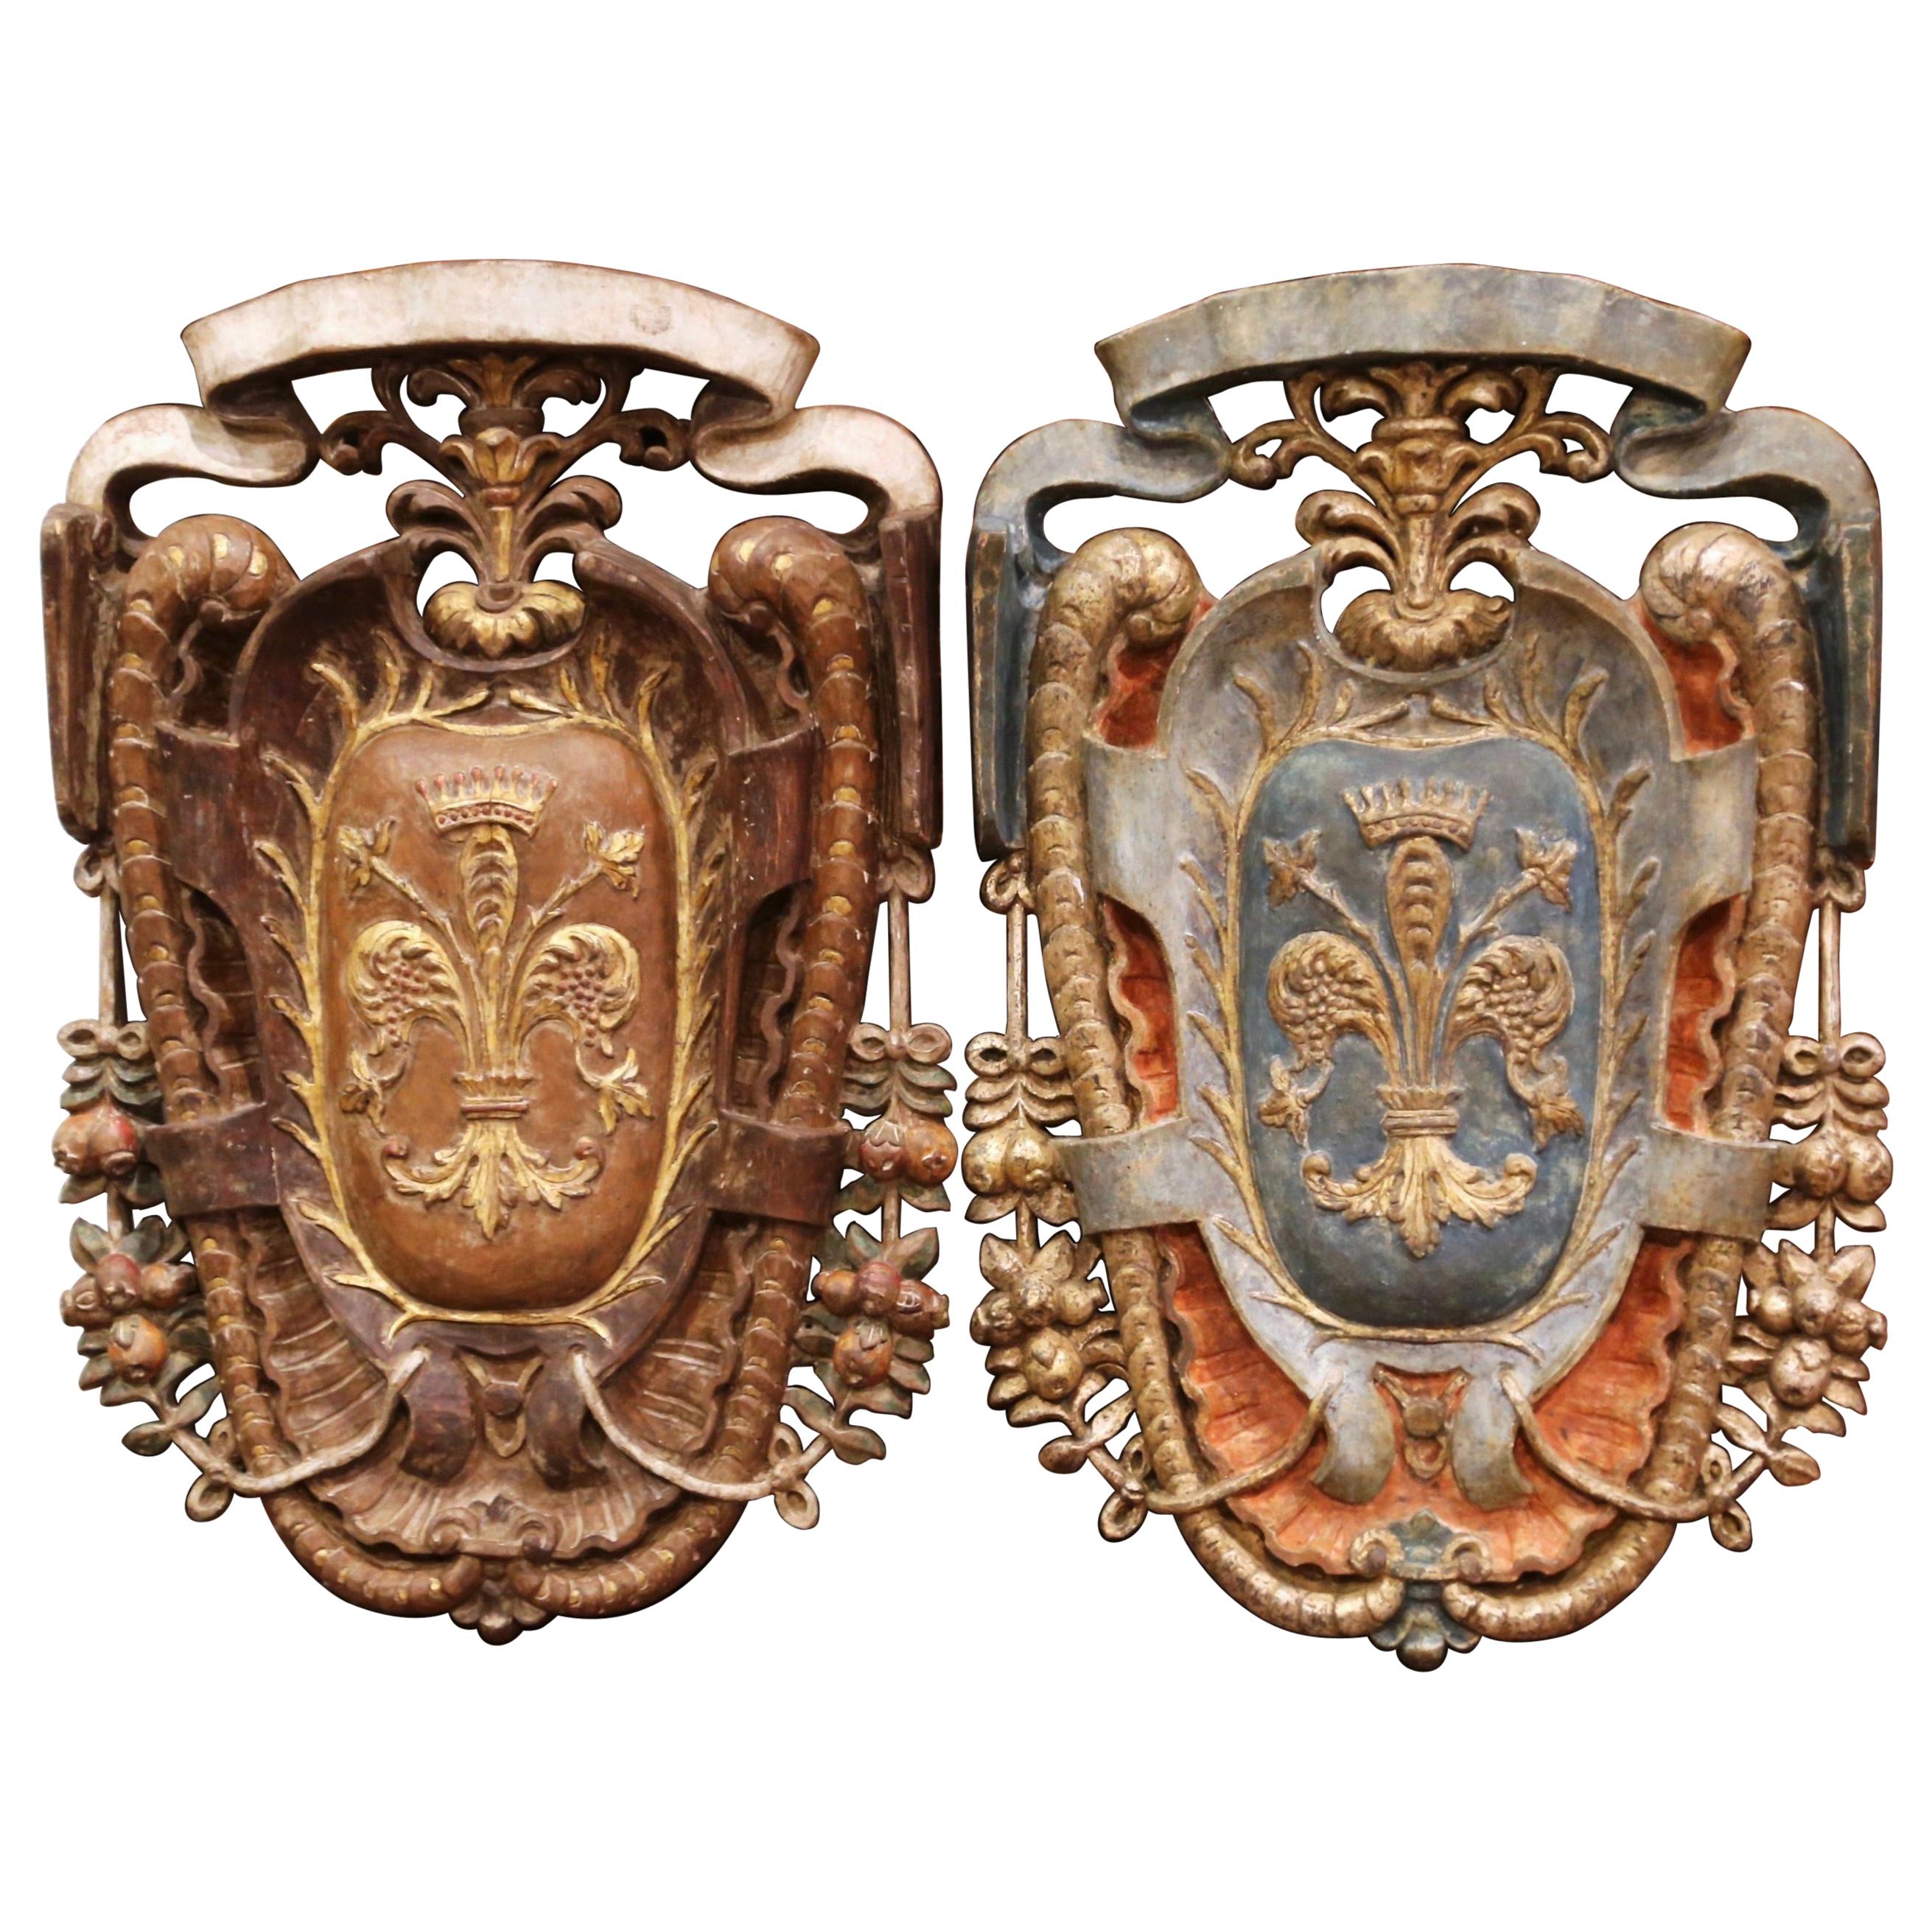 Pair of Early 20th Century Italian Carved Gilt and Painted Wall Hanging Shields